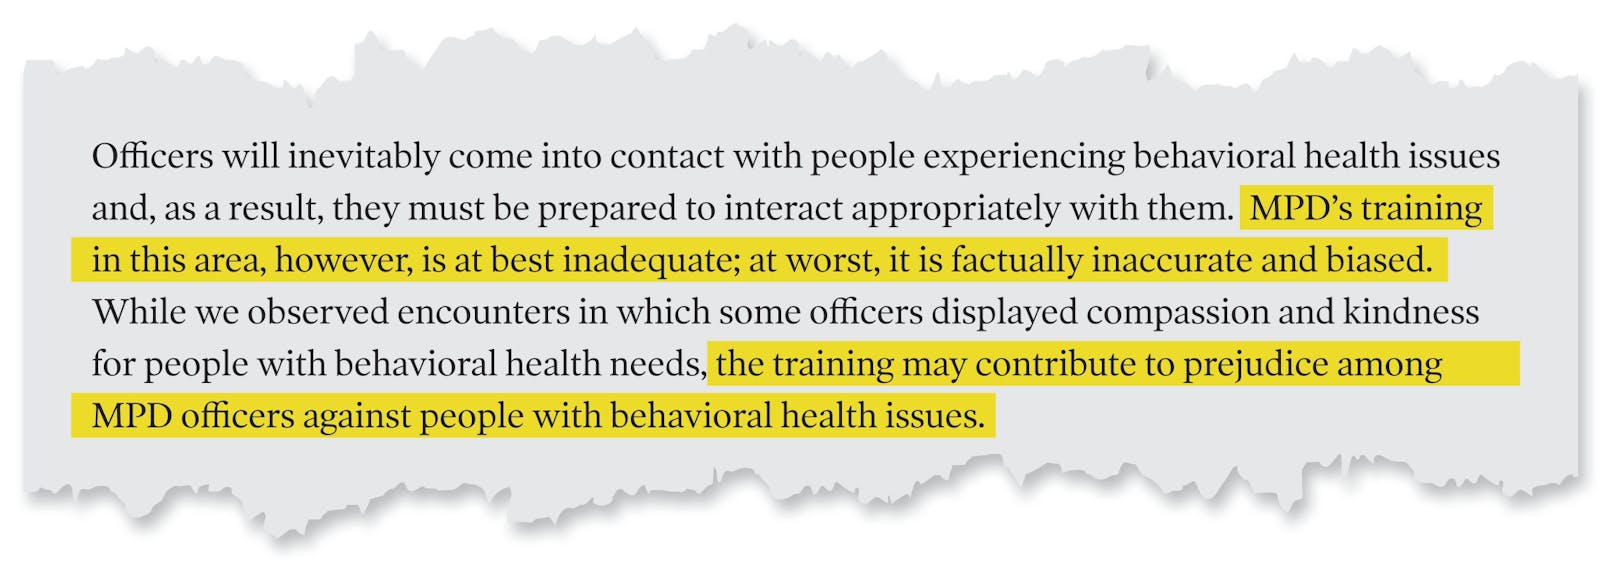 A page tear from the Department of Justice's report that reads: 'Officers will inevitably come into contact with people experiencing behavioral health issues and, as a result, they must be prepared to interact appropriately with them. MPD's training in this area, however is at best inadequate; at worst, it is factually inaccurate and biased. While we observed encounters in which some offices displayed compassion and kindness for people with behavioral health needs, the training may contribute to prejudice among MPD officers against people with behavioral health issues.'